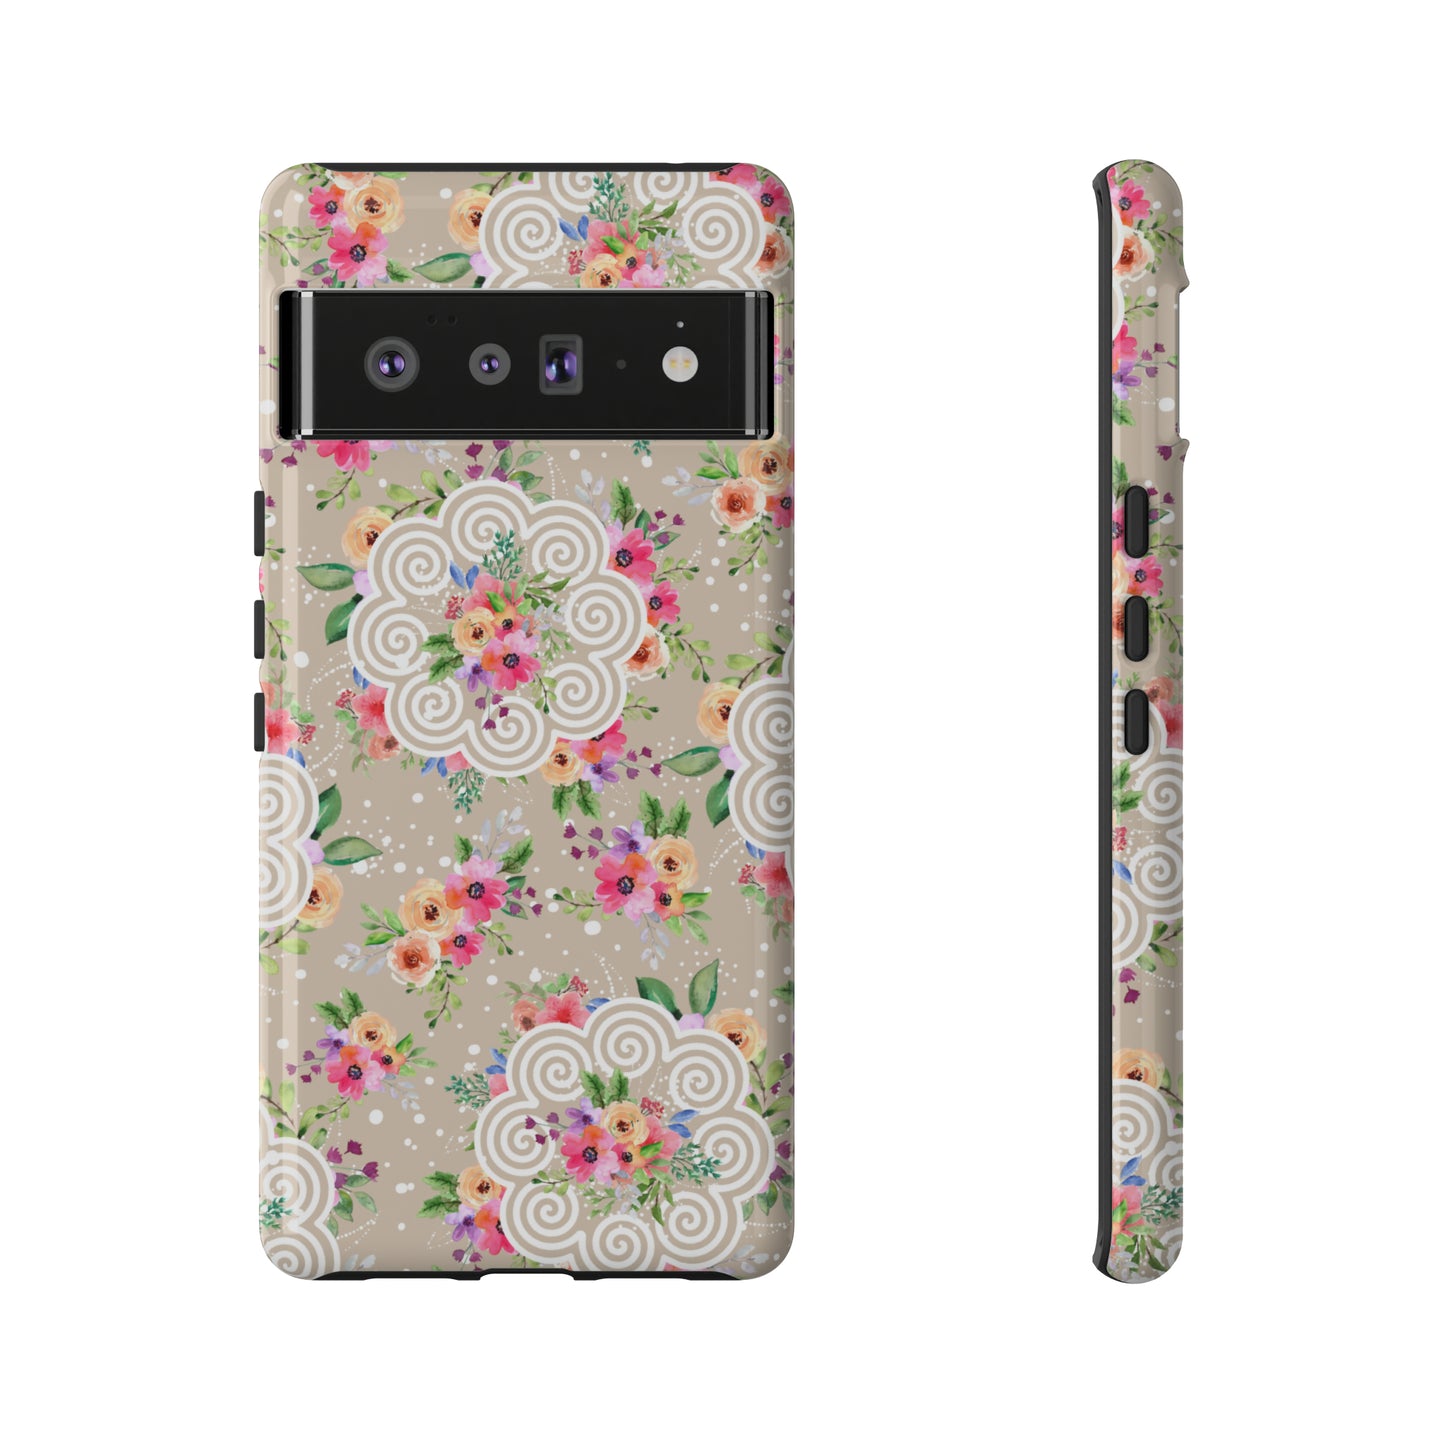 Phone Case Floral Hmong Inspired - Khaki